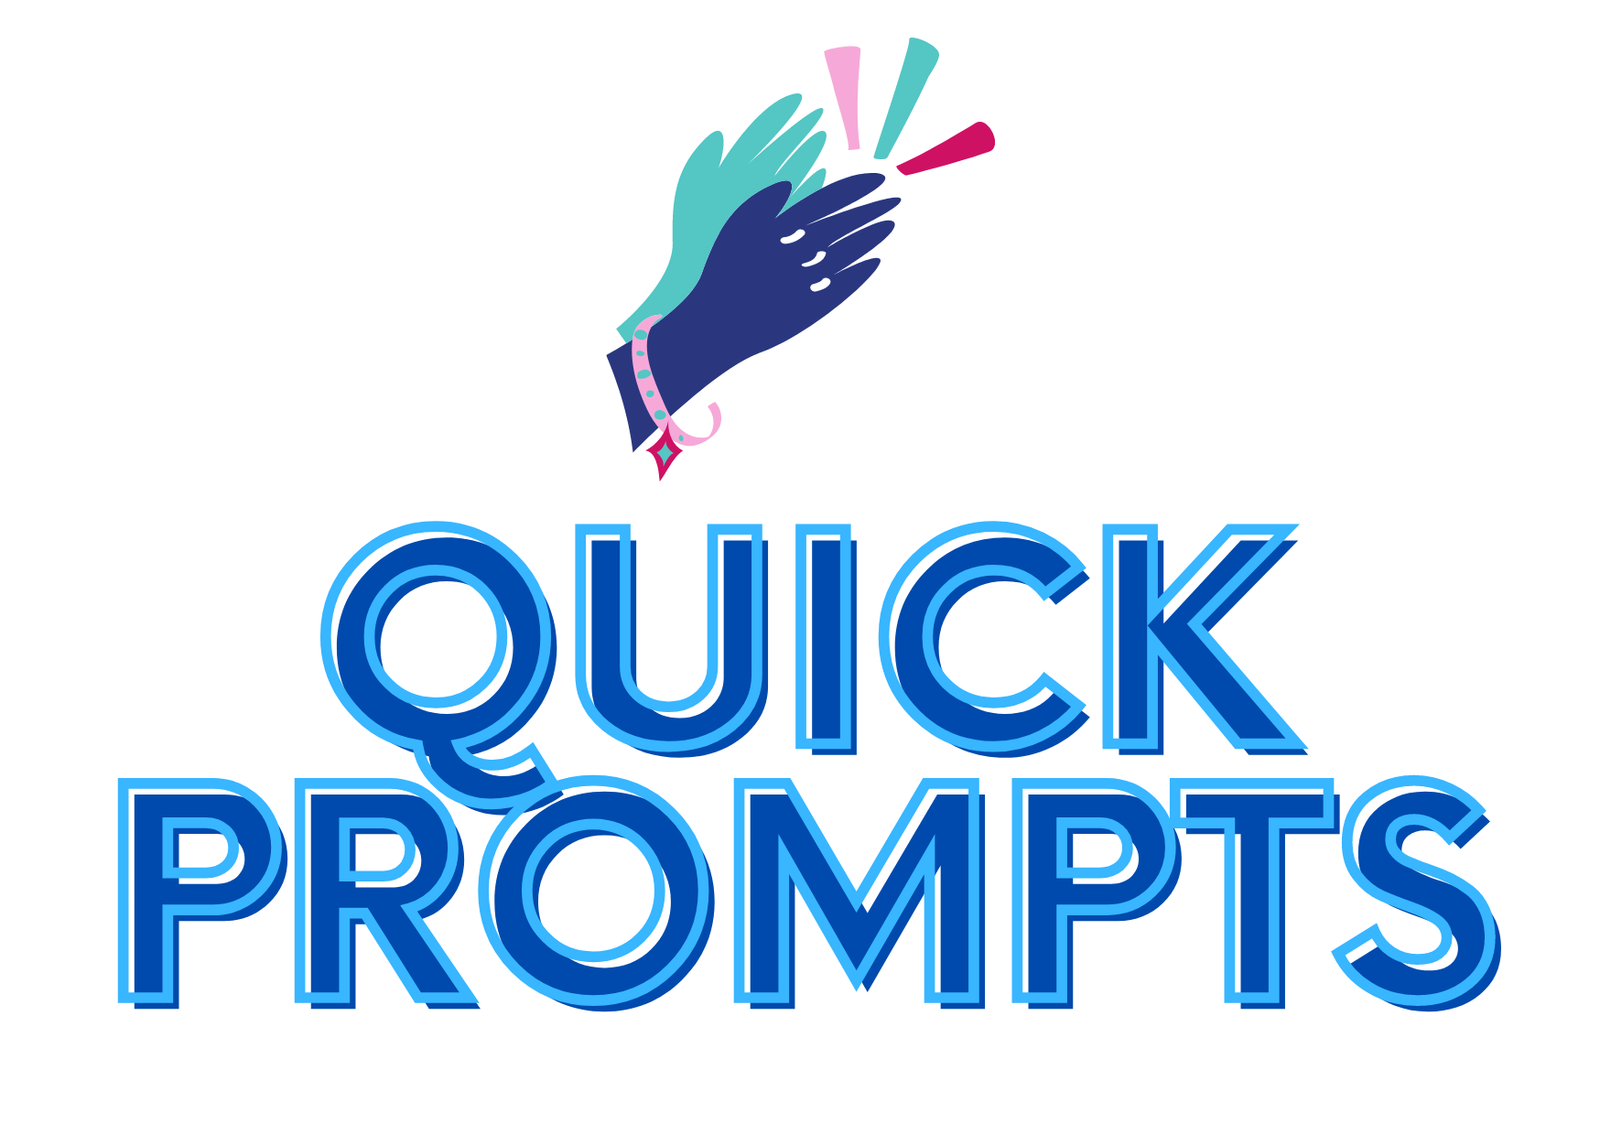 Stylized Quick Prompts logo with clapping hand illustration